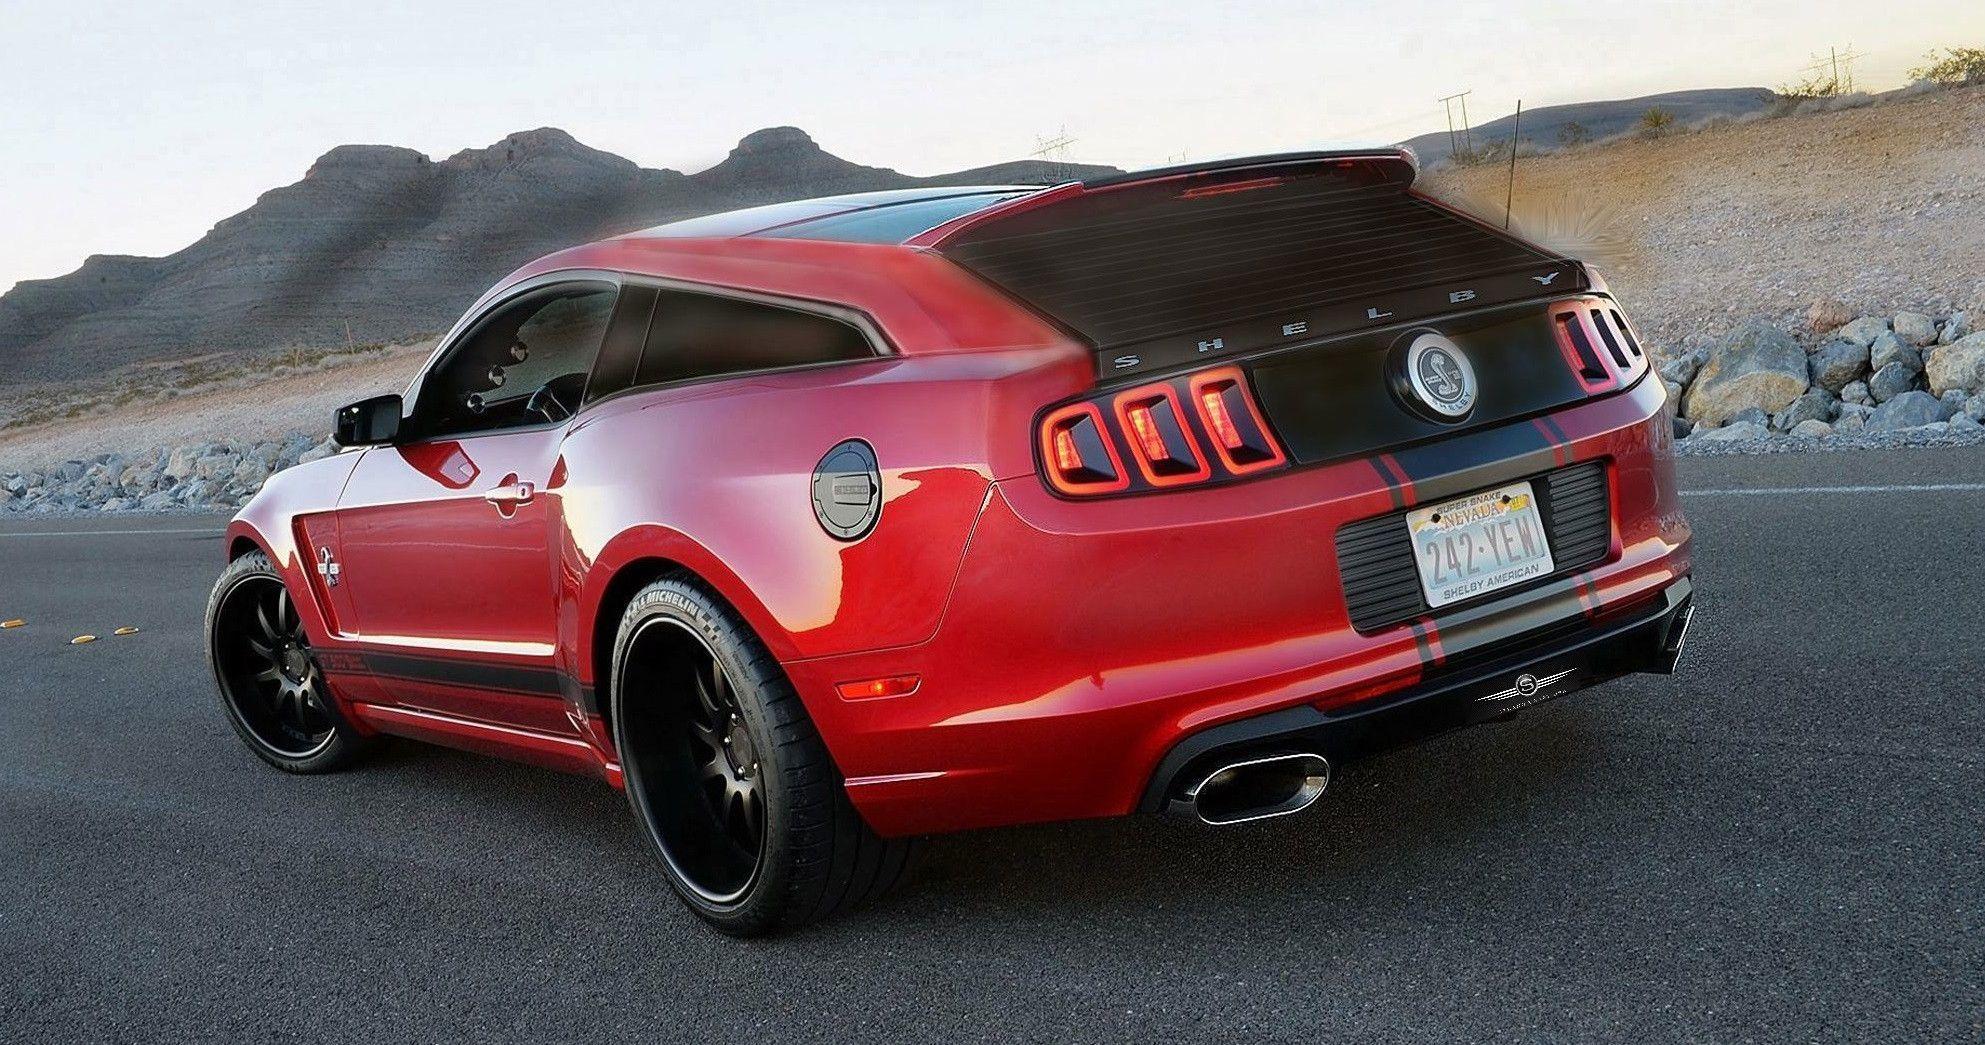 Ford Mustang GT500 Shelby Best Quality Wallpaper For Desktop